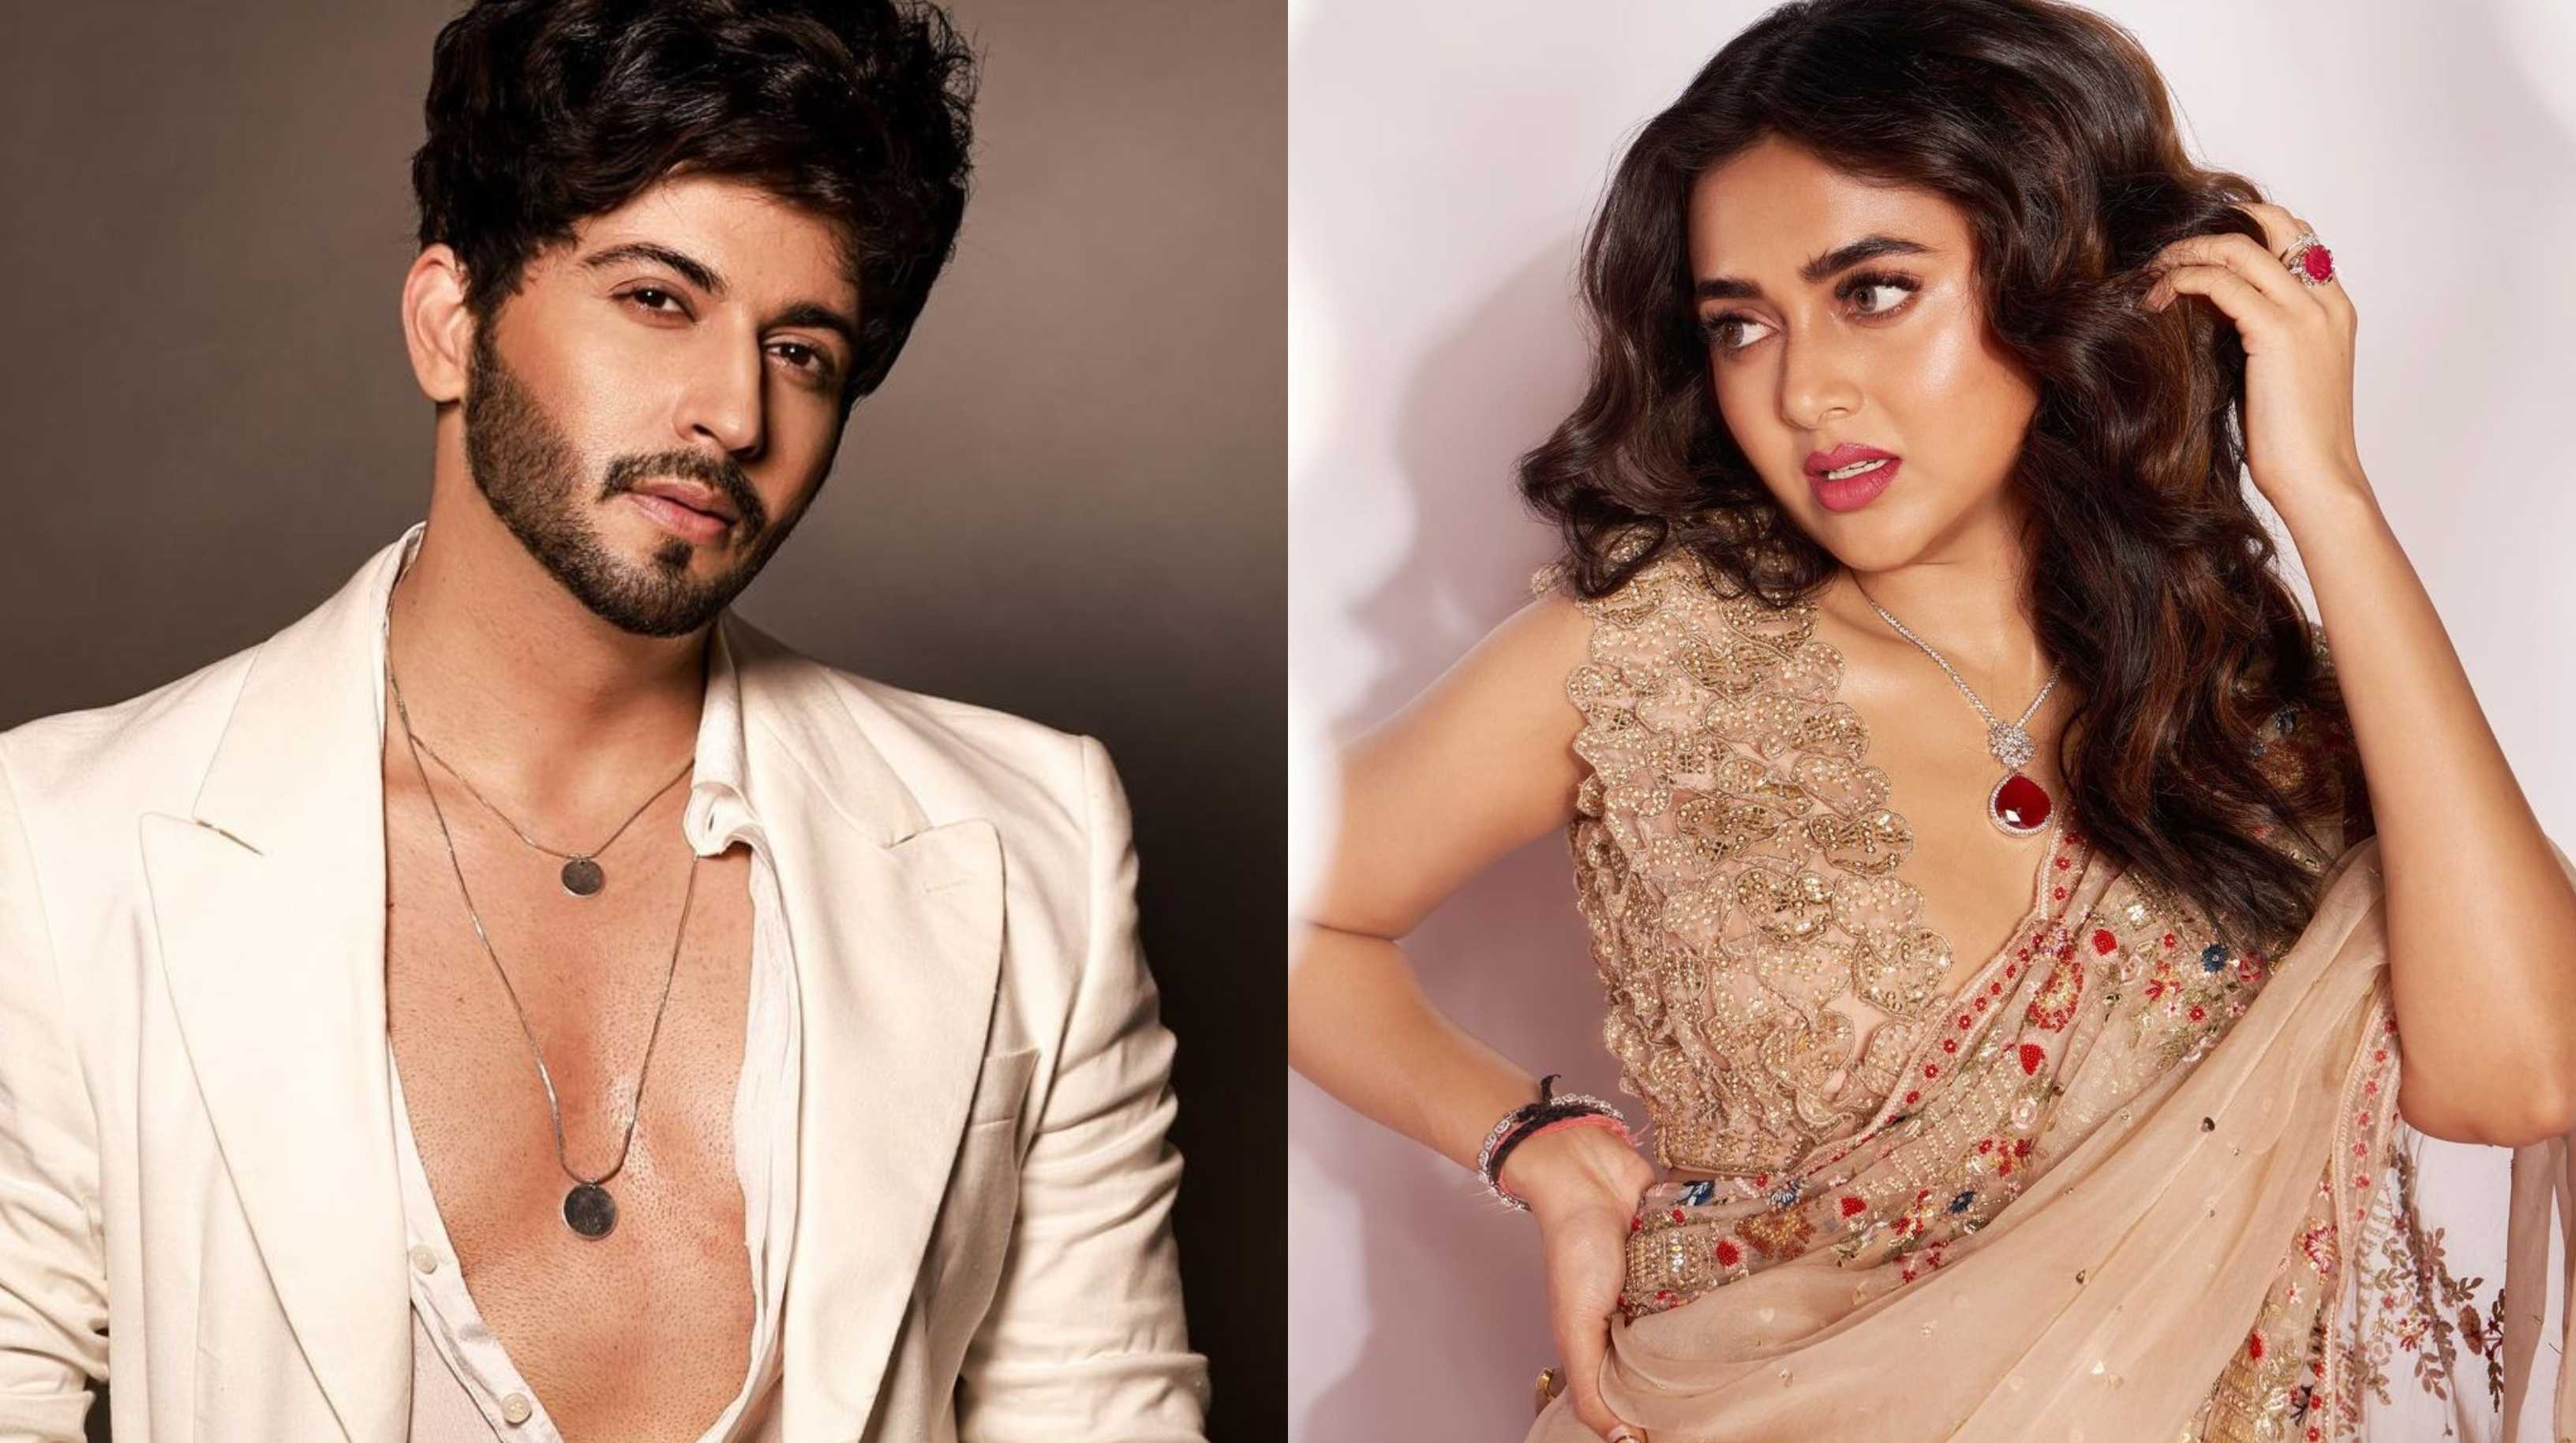 After Naagin 6, Tejasswi Prakash to share the screen with Dheeraj Dhoopar in Ekta Kapoor’s new show?